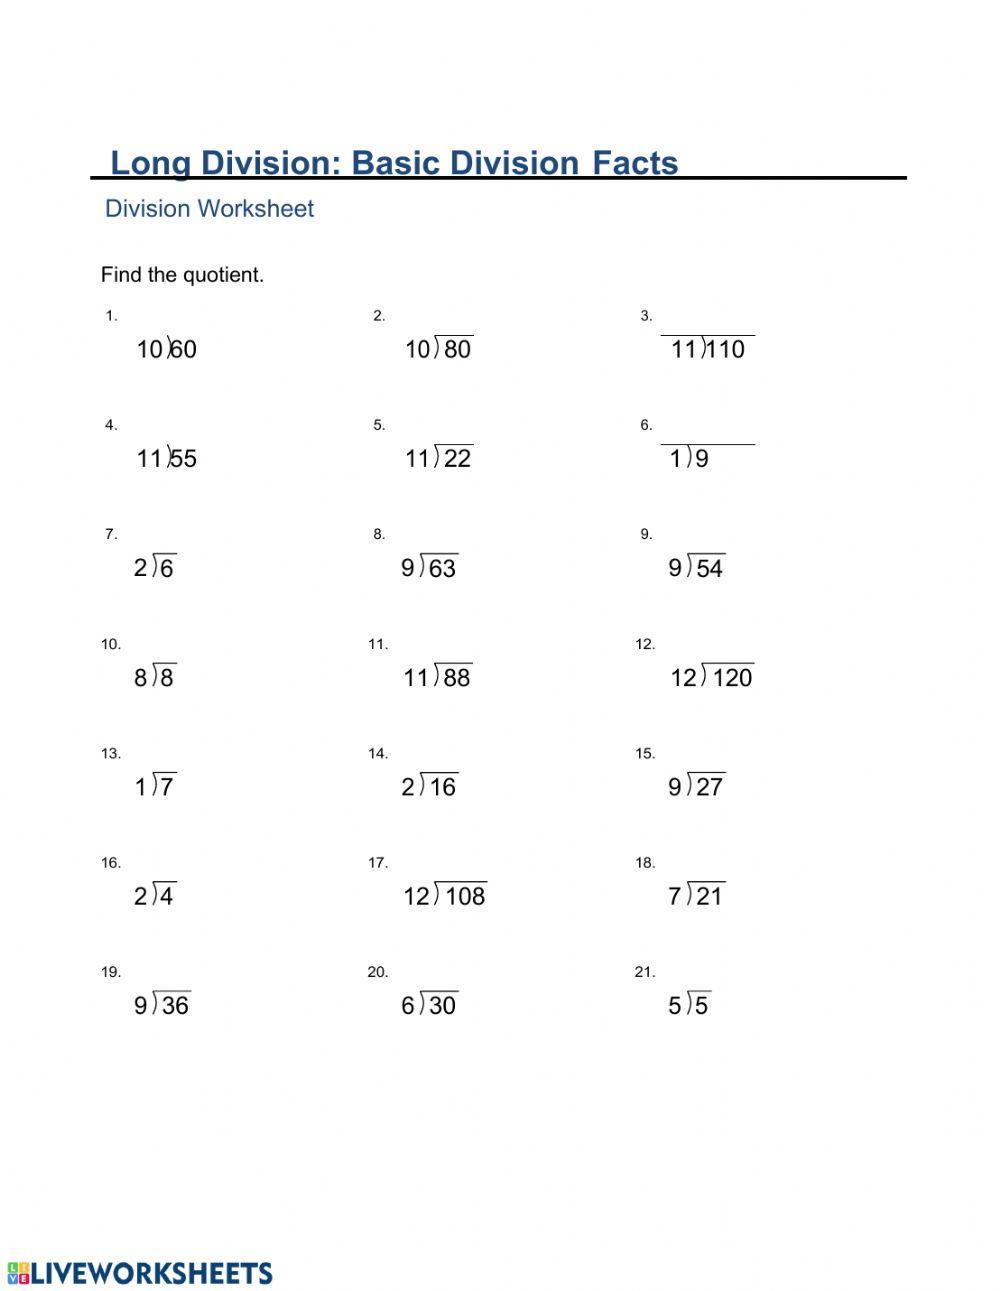 Long Division Facts